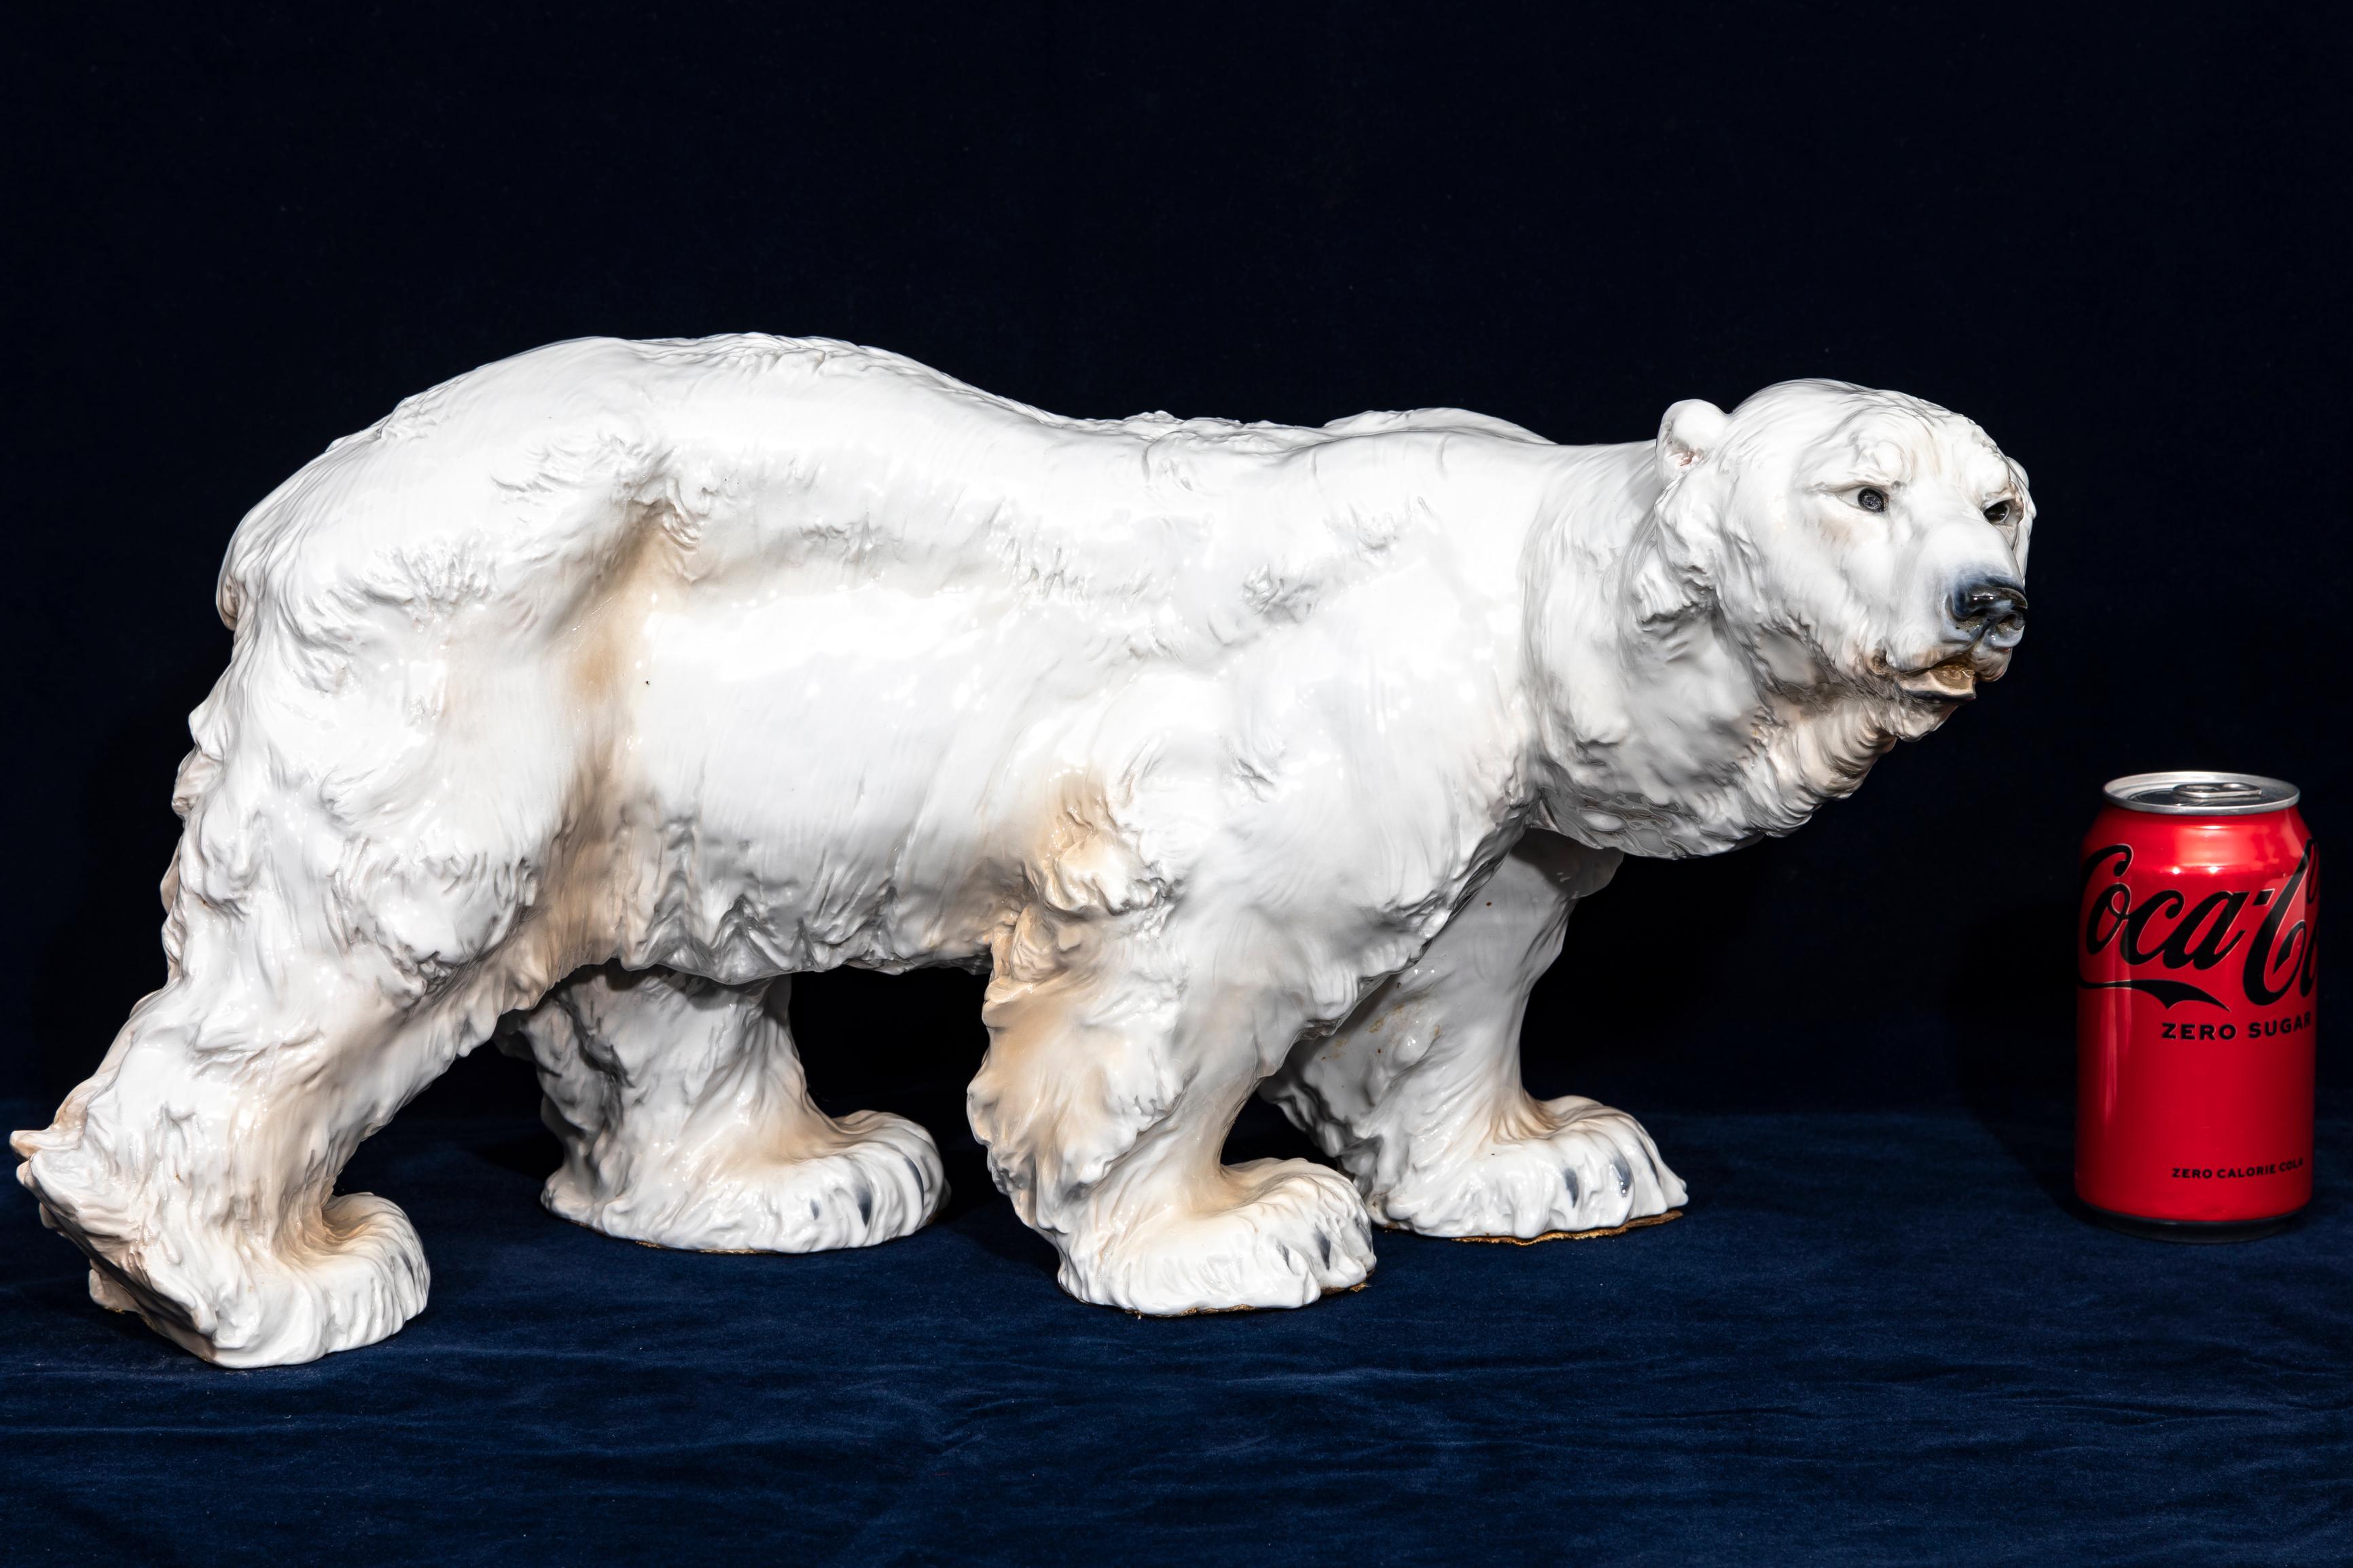 A beautiful and very large Art Deco Meissen Porcelain sculpture of a polar bear by Otto Jarl, beautifully sculpted, hand engraved and hand-painted under the glaze. Jarl, Otto (1856-1915), Austro-Swedish sculptor, studied in Stockholm and from 1881